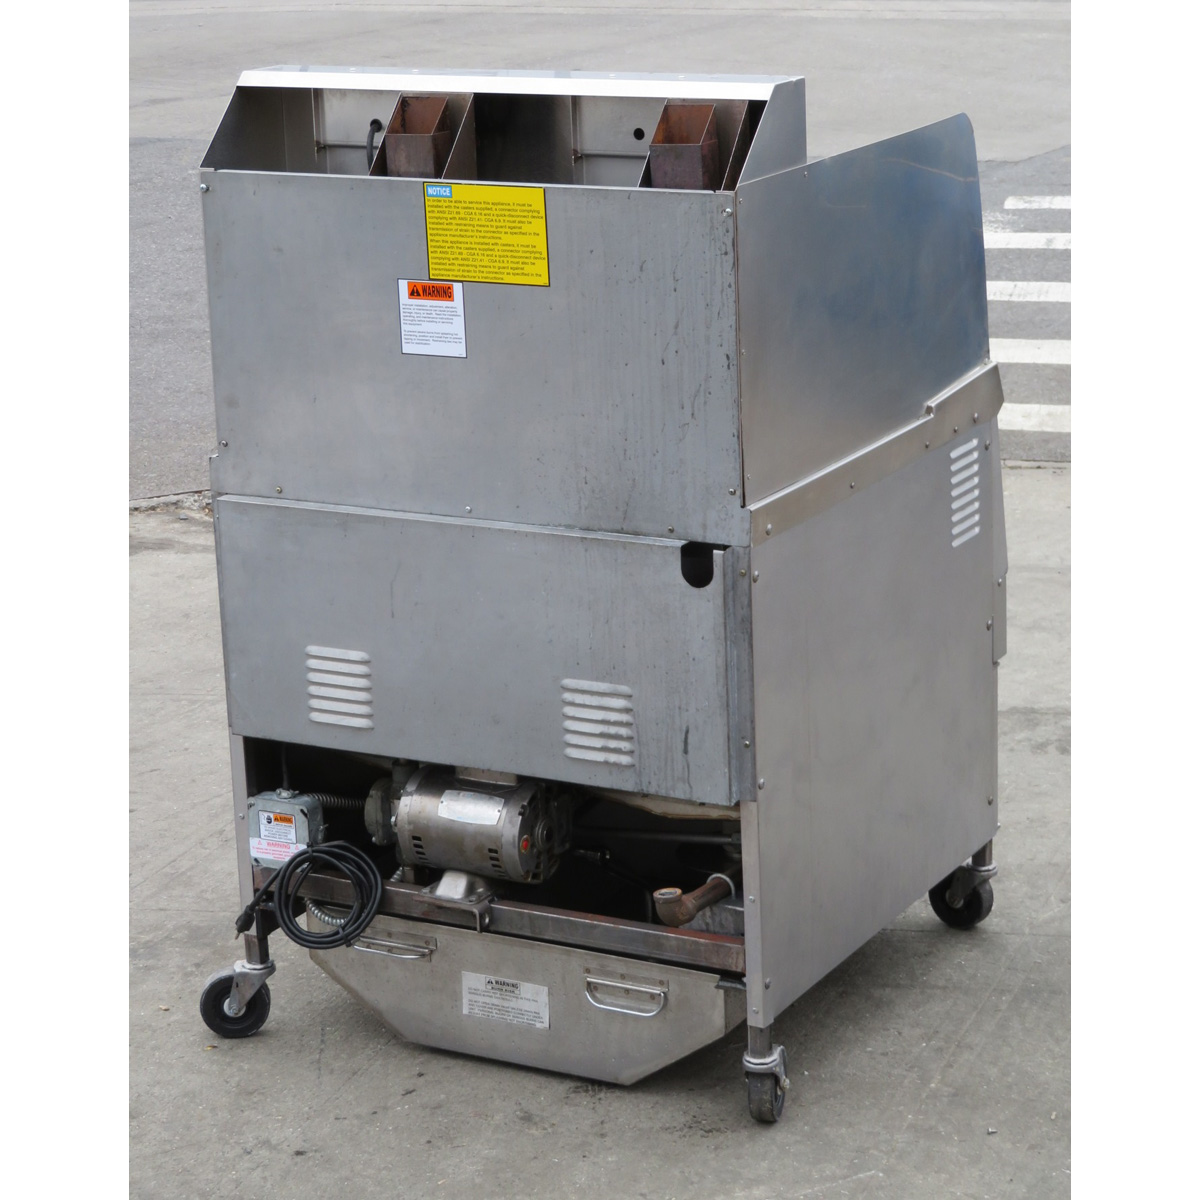 Henny Penny OGA-322 Natural Gas 2 Bank Fryer, Used Great Condition image 4